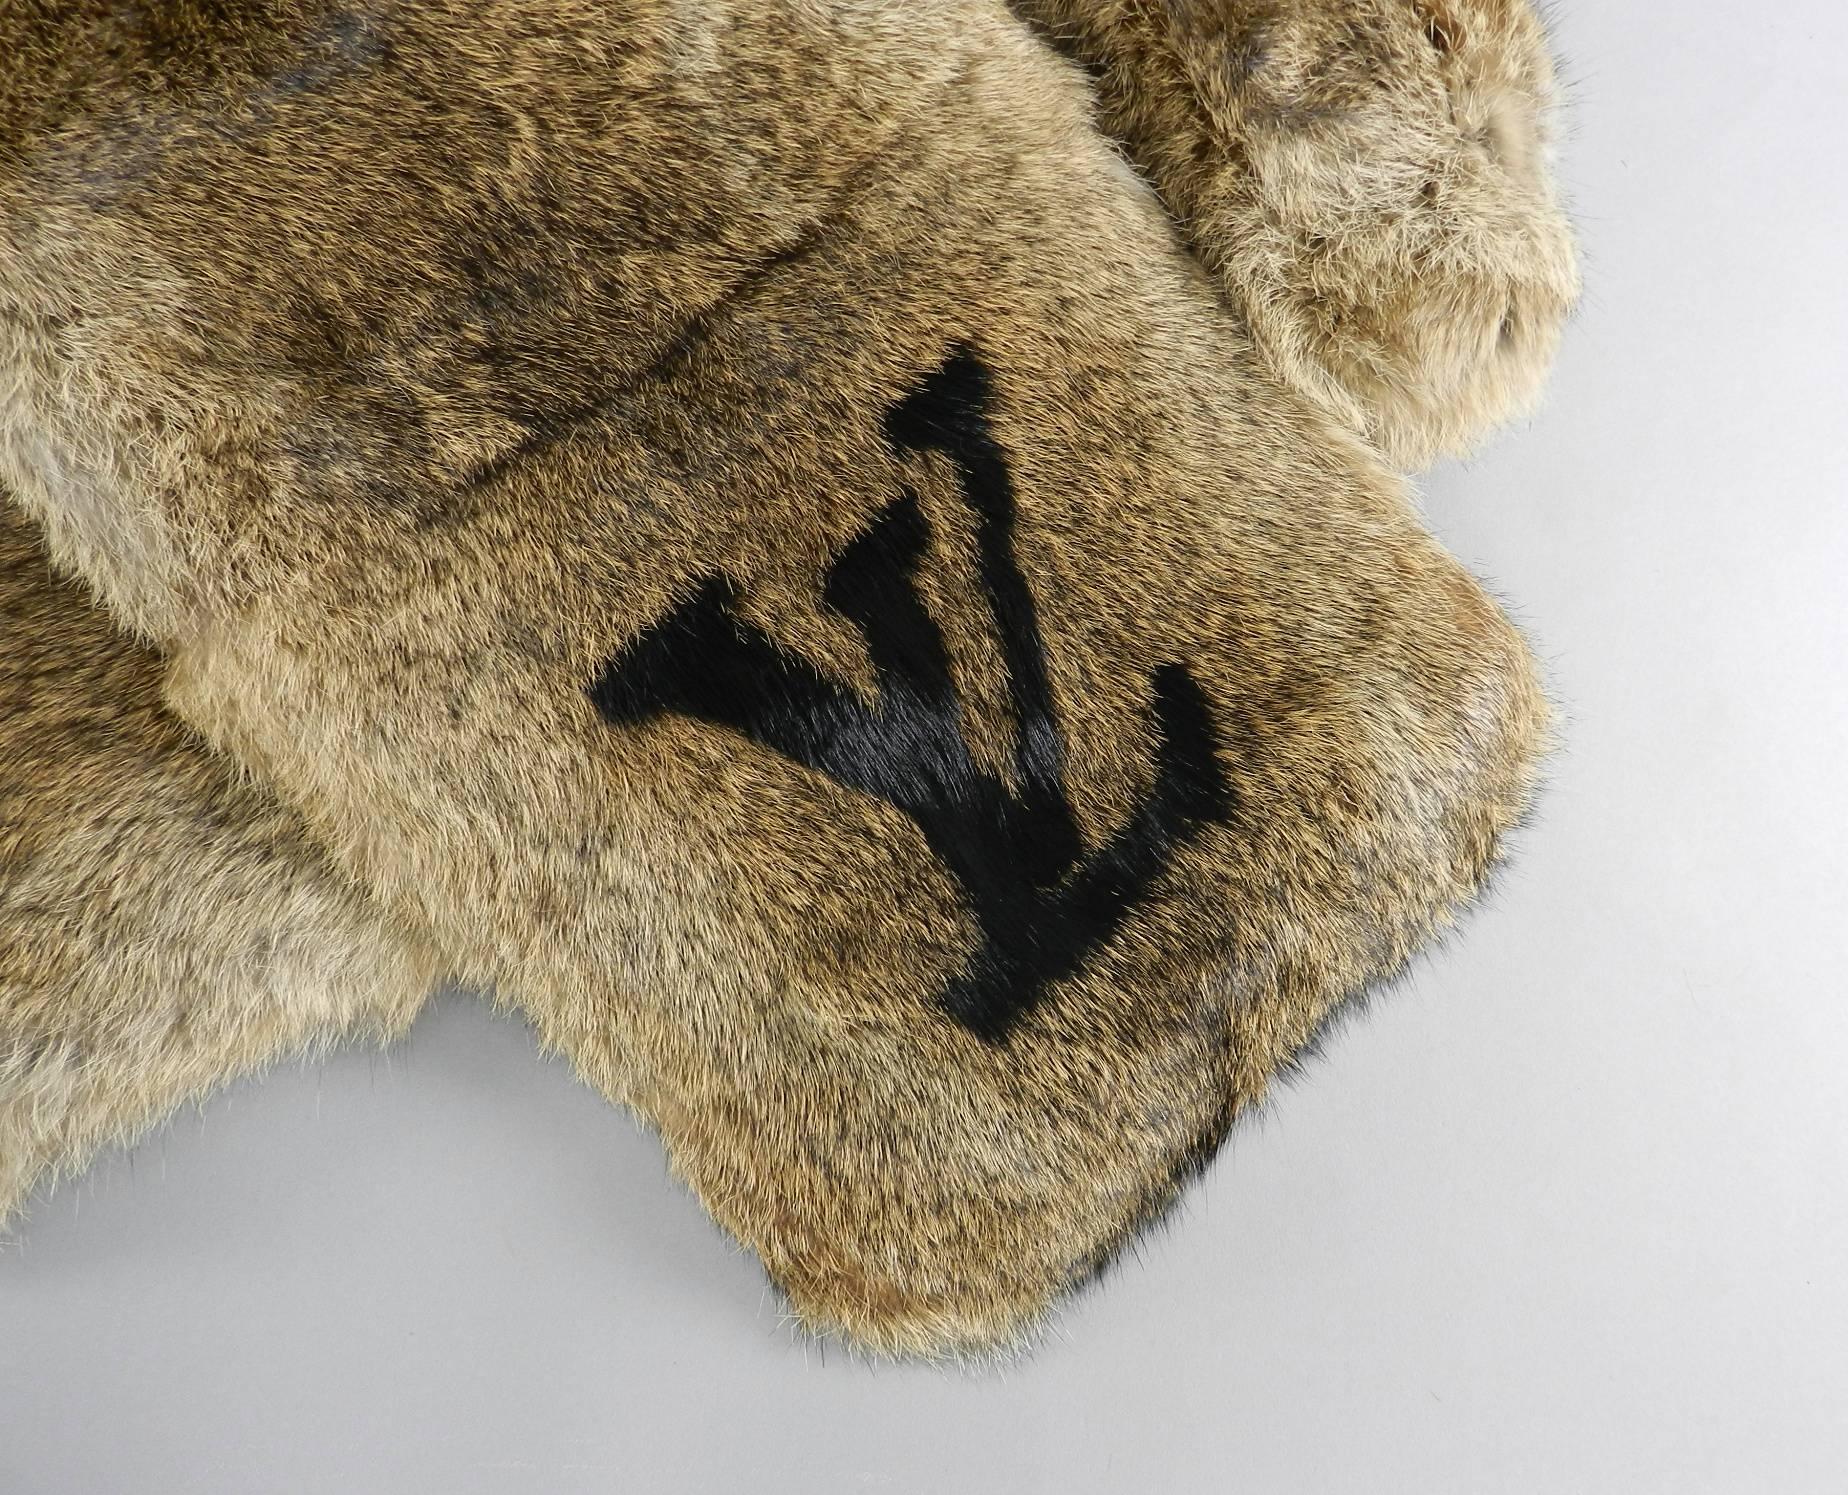 Louis Vuitton rabbit fur LV logo scarf. Limited edition runway item from the fall 2005 men's runway show. Can be worn unisex. Excellent clean condition. Measures 57